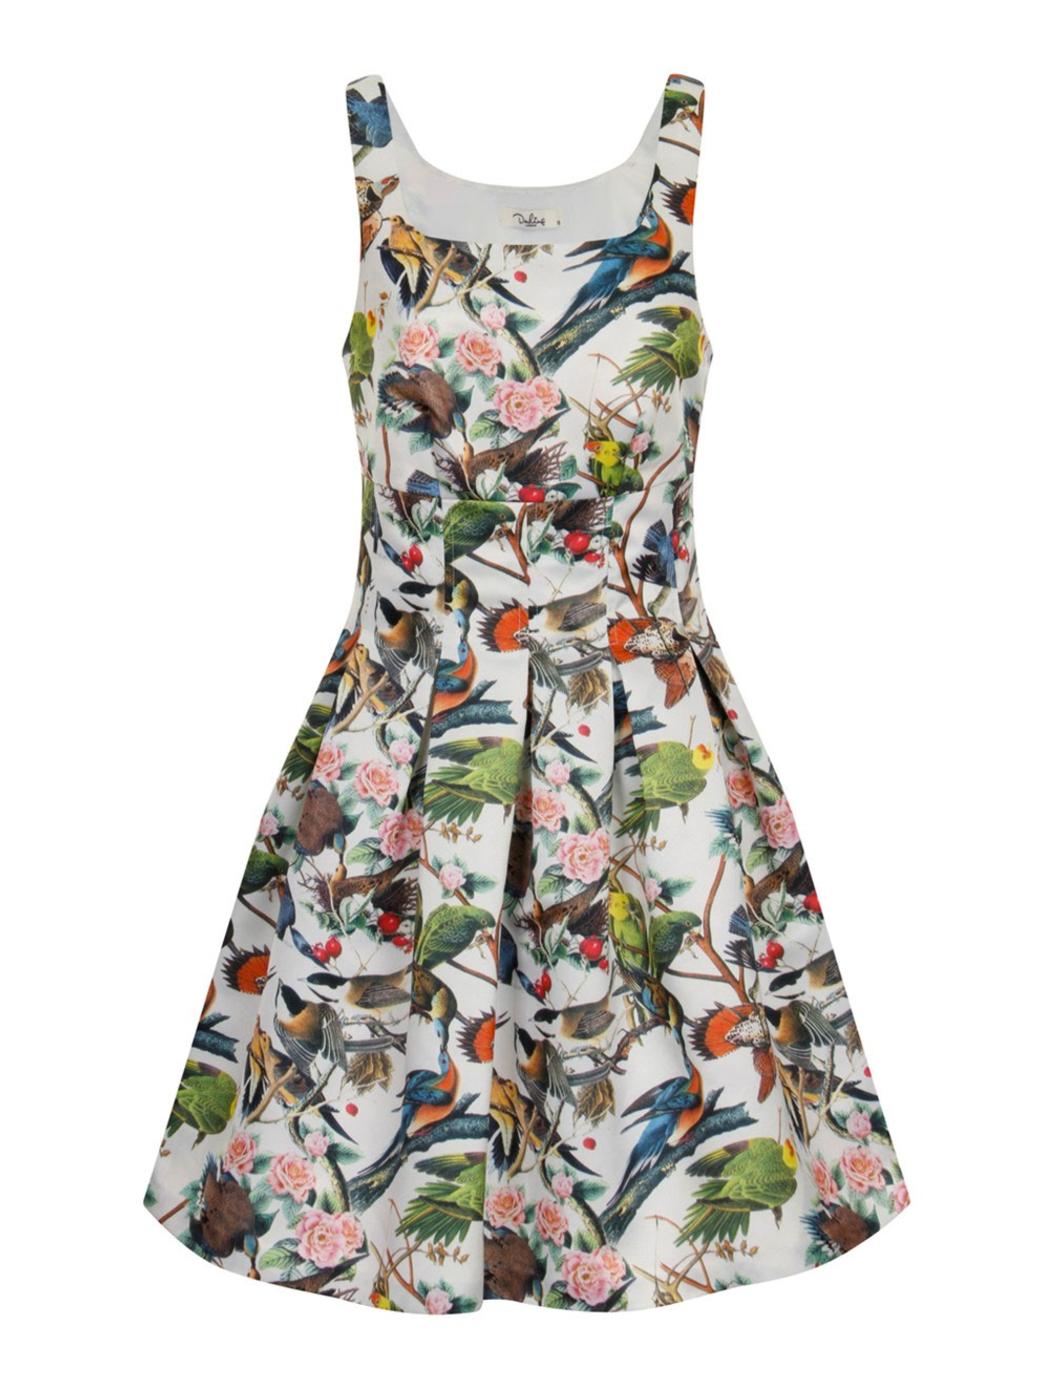 DARLING Twiggy Vintage Floral Bird Flared Dress in White